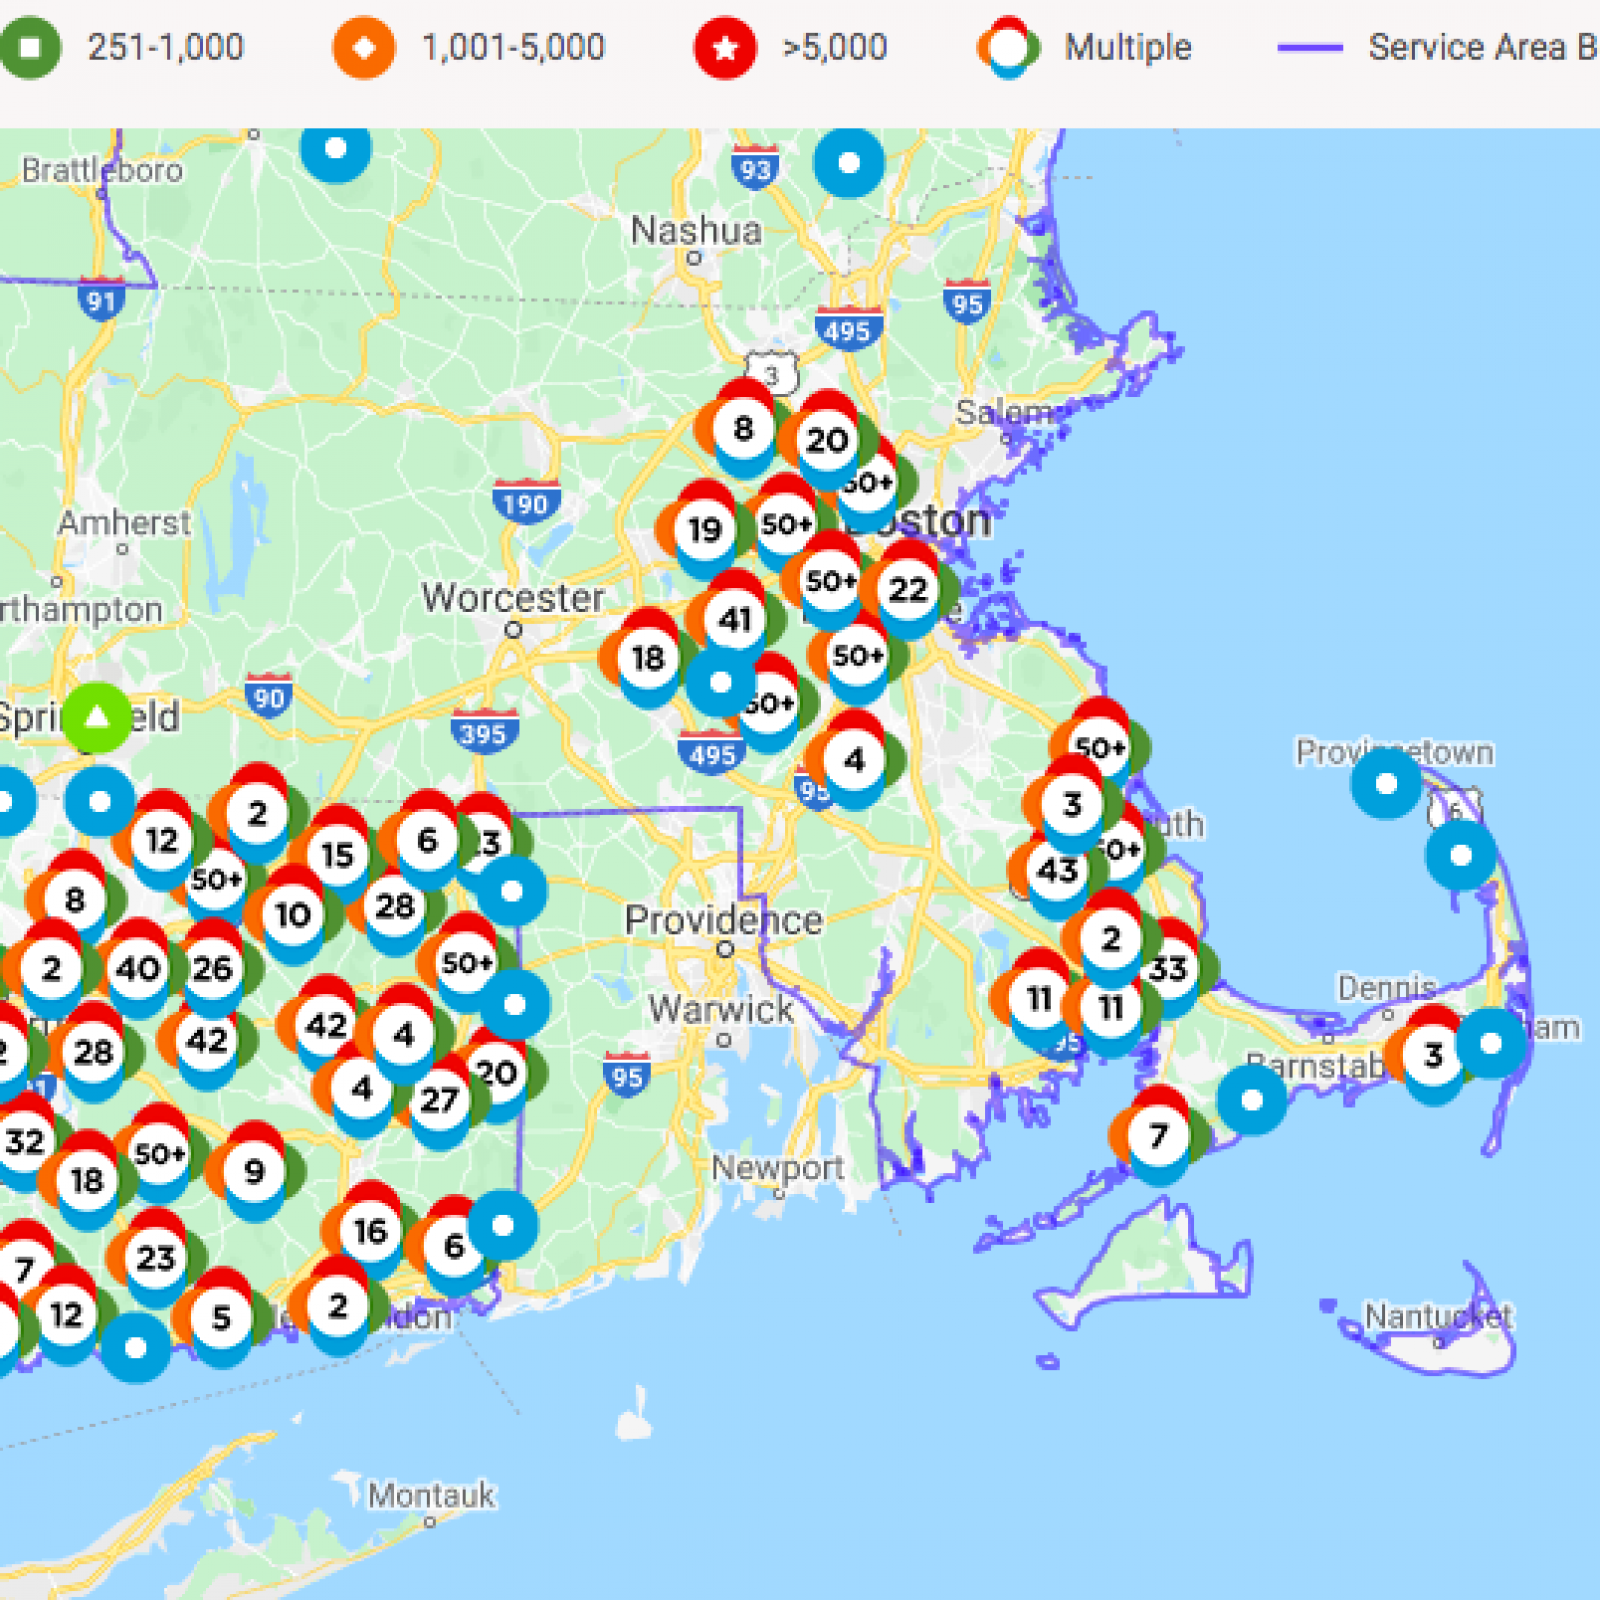 national grid ri power outage map National Grid Ri Power Outage Map Campus Map national grid ri power outage map